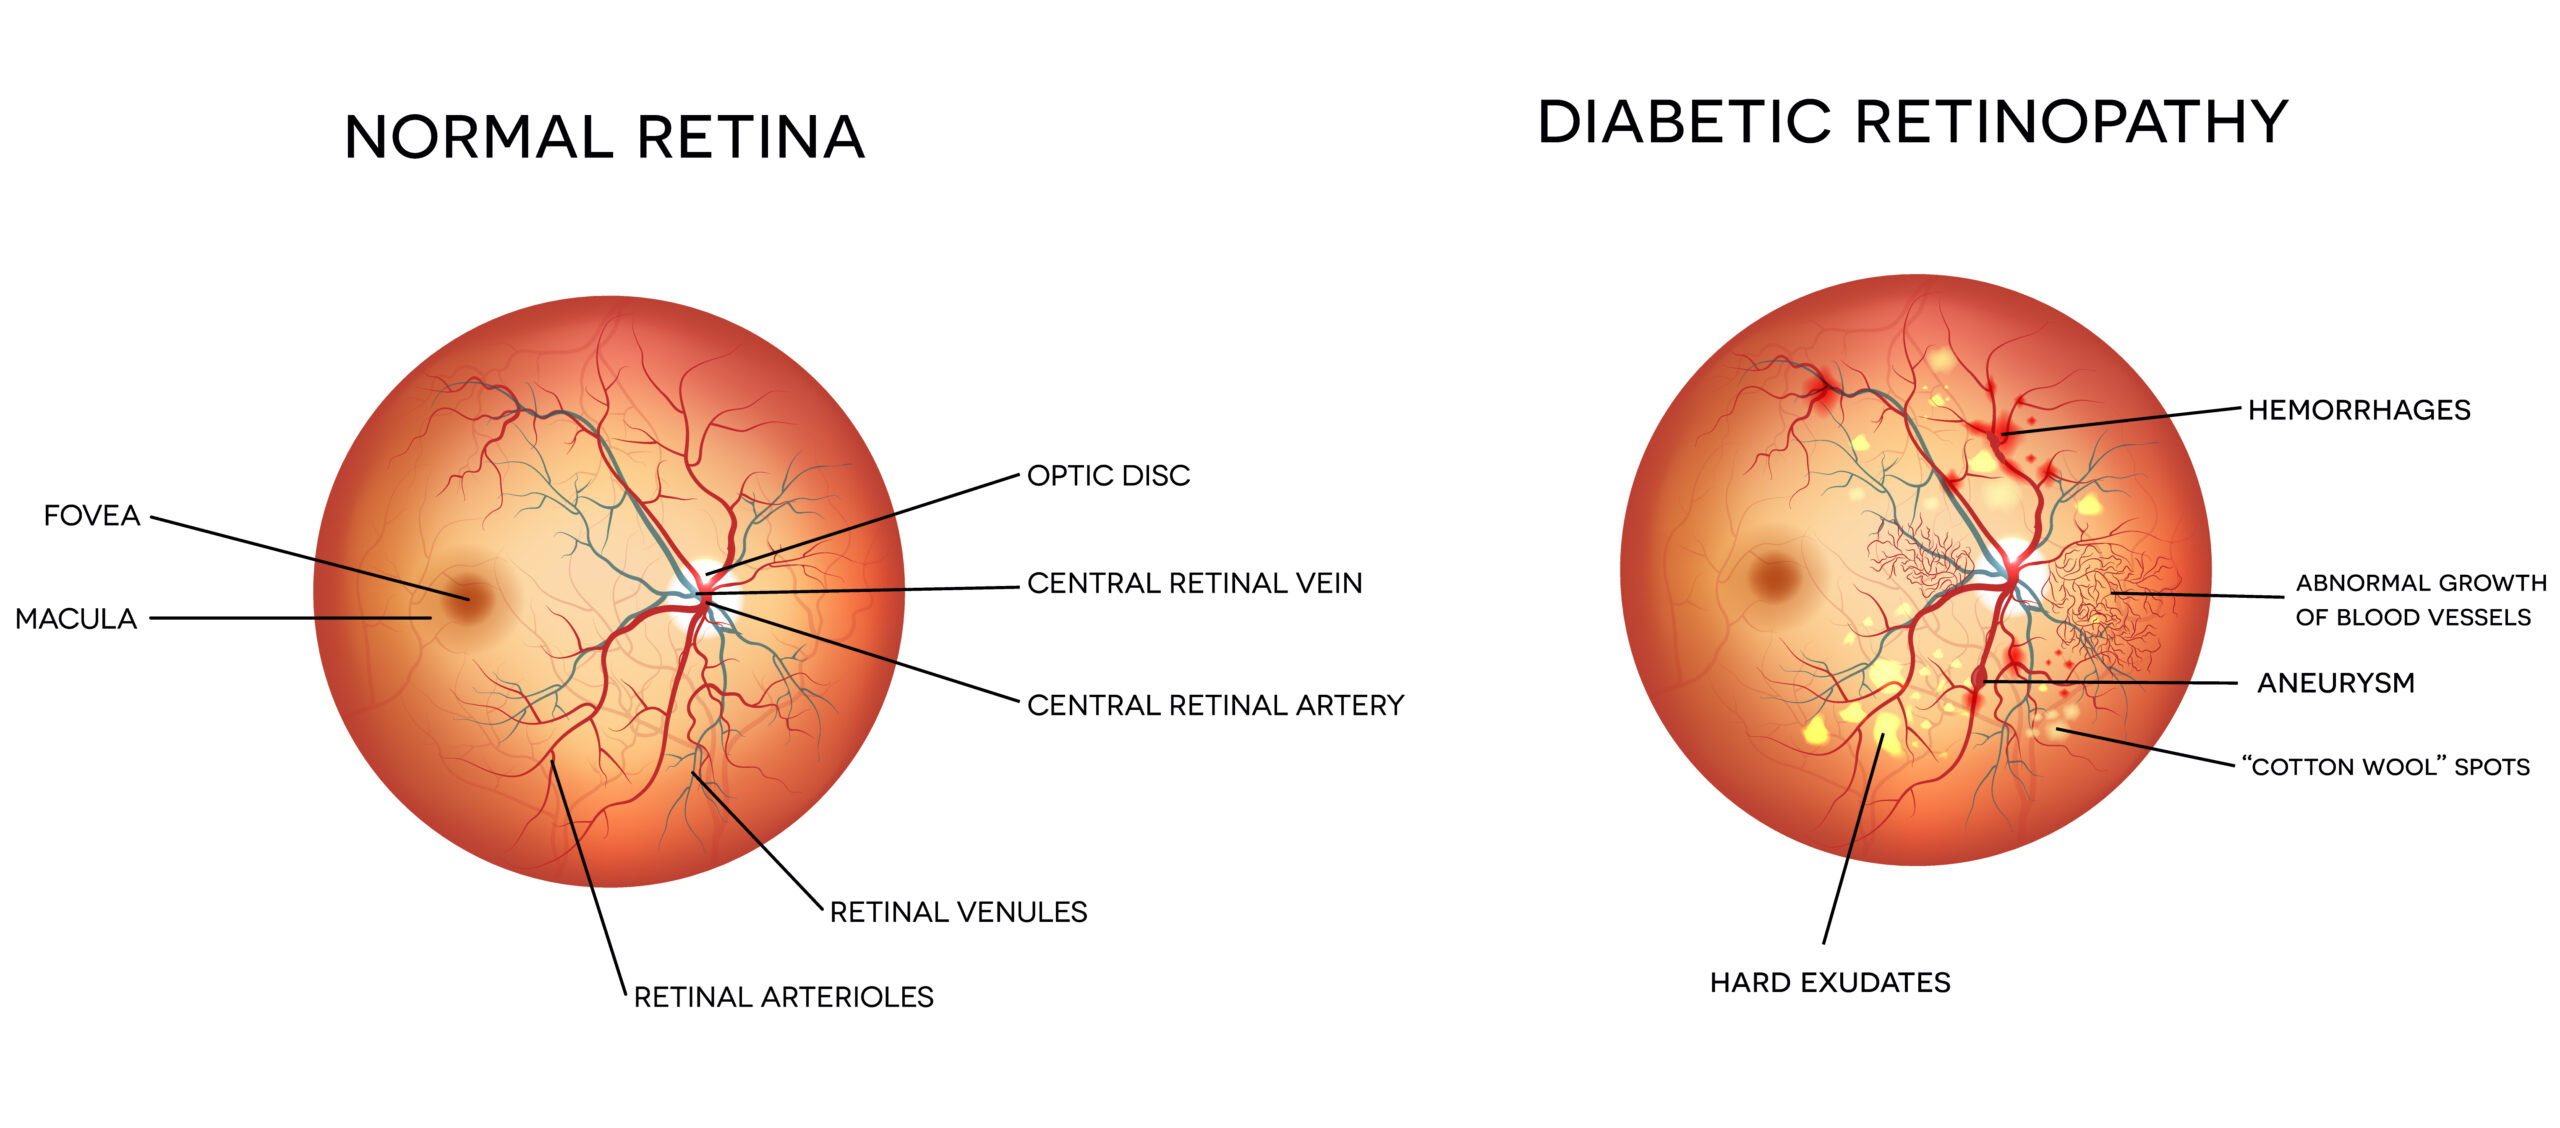 Diagram comparing normal retina with a retina with diabetic retinopathy